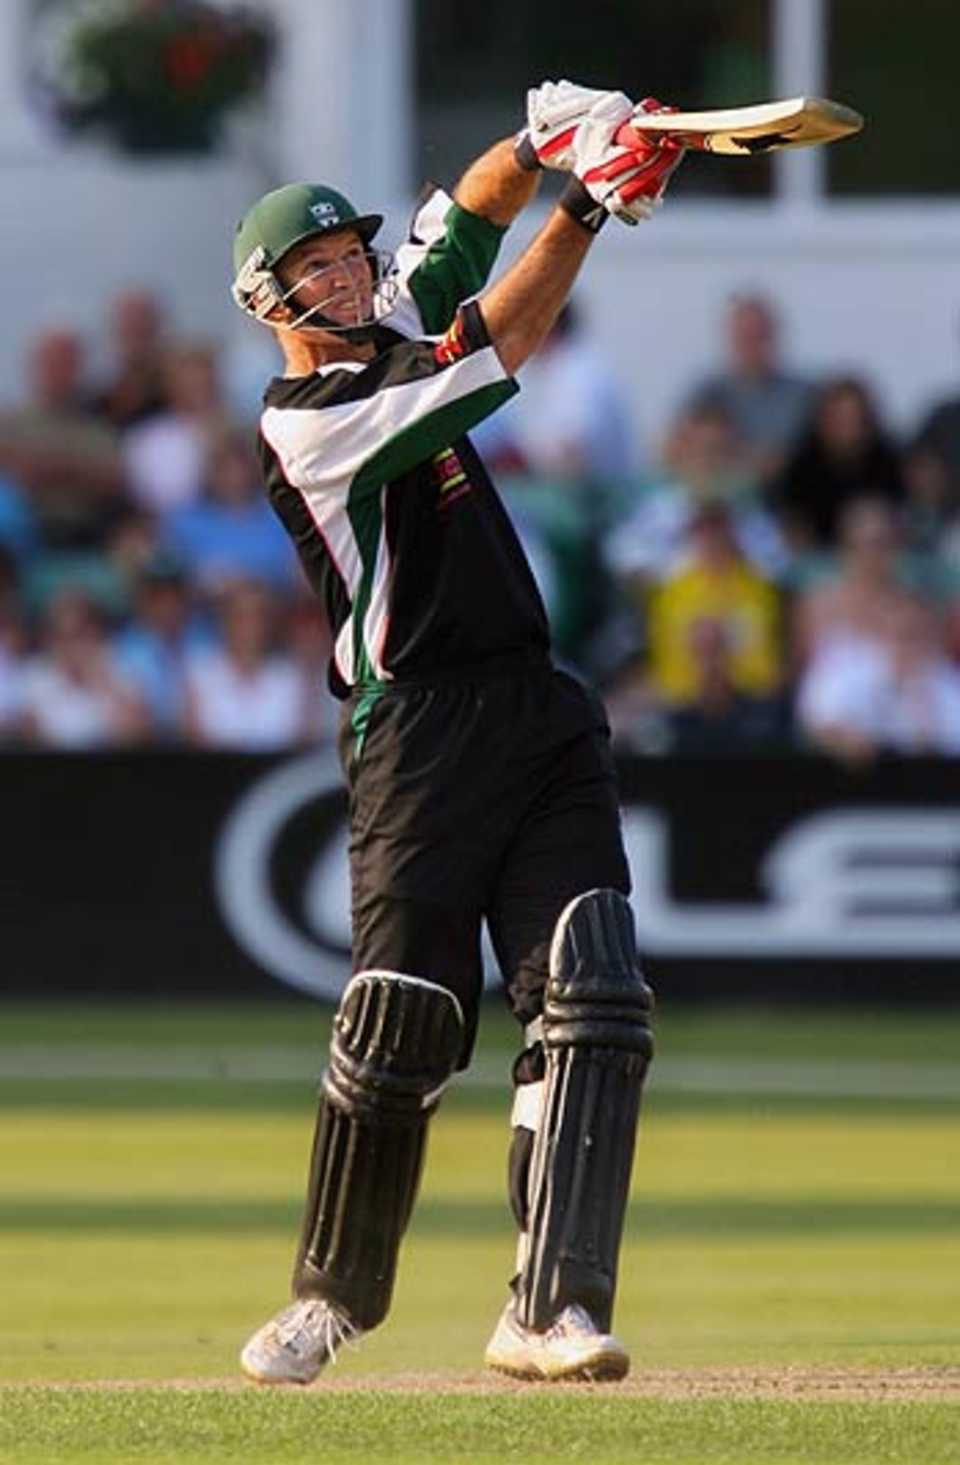 Graeme Hick bashed 75 off 34 balls but Worcestershire still lost